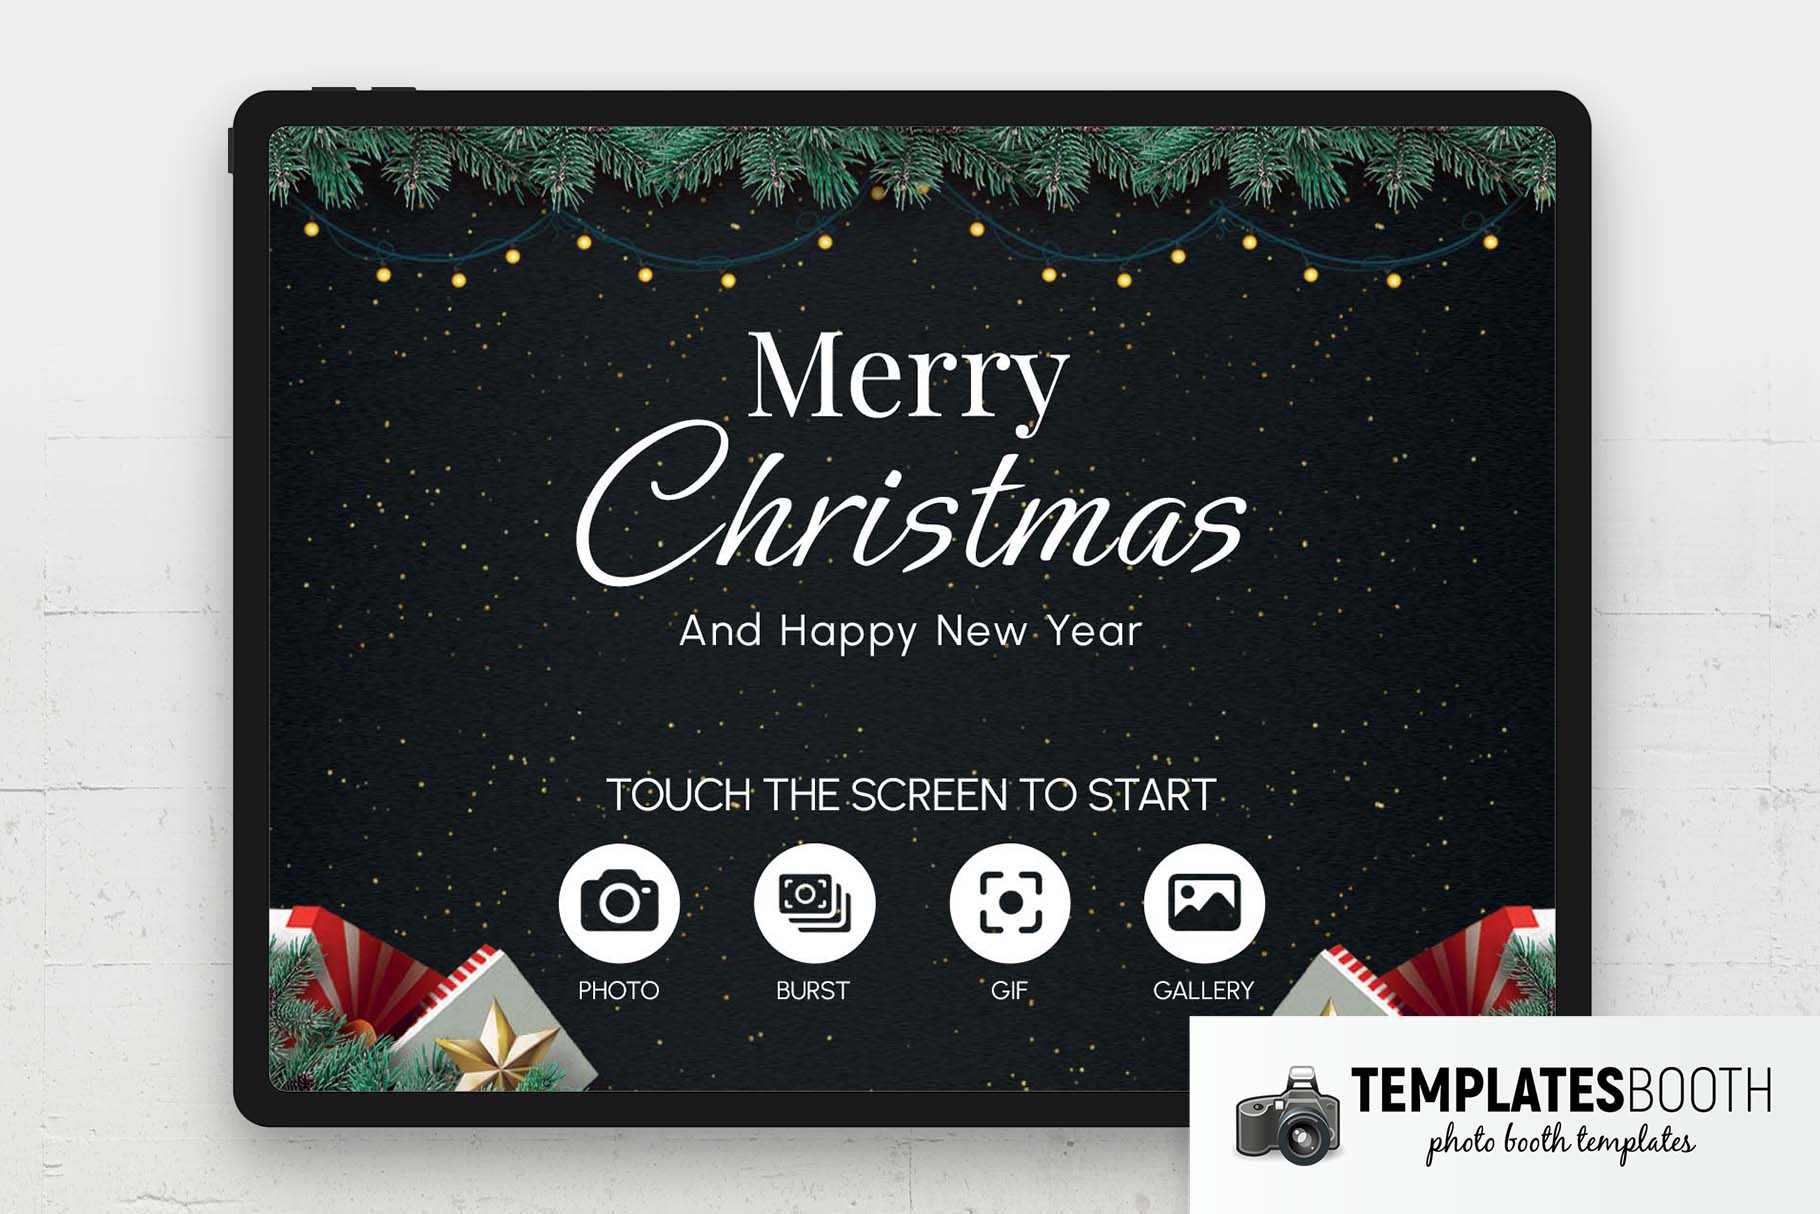 Festive Christmas Photo Booth Welcome Screen